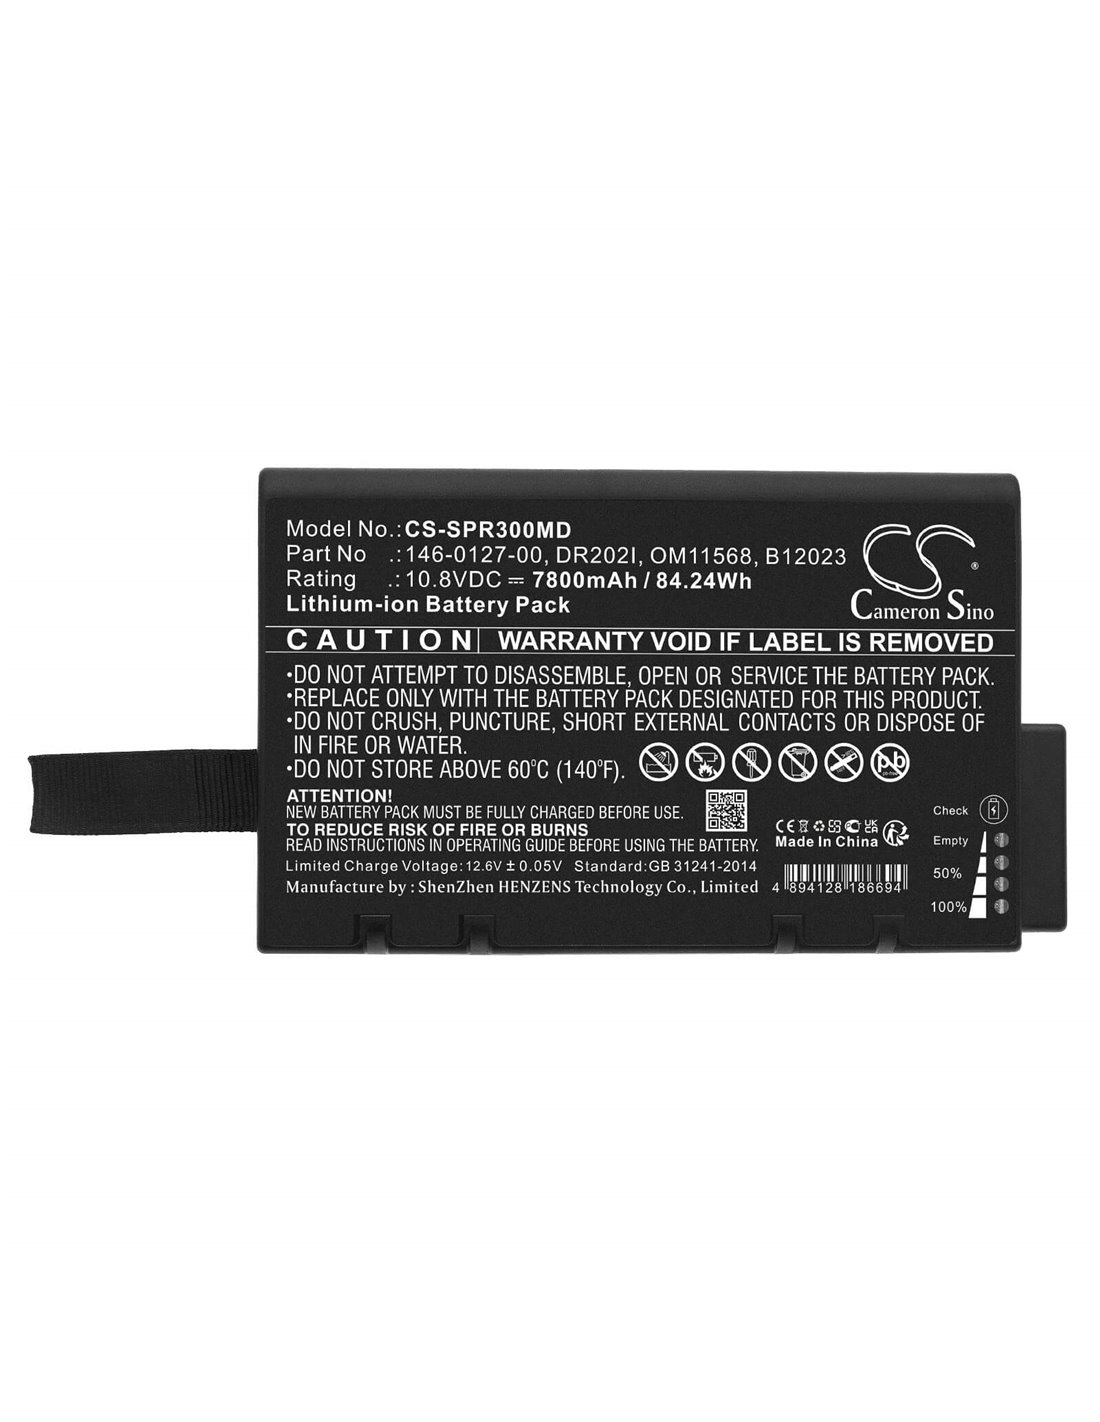 10.8V, Li-ion, 7800mAh, Battery fits Spacelabs, Mcare300, Mcare300d, 84.24Wh